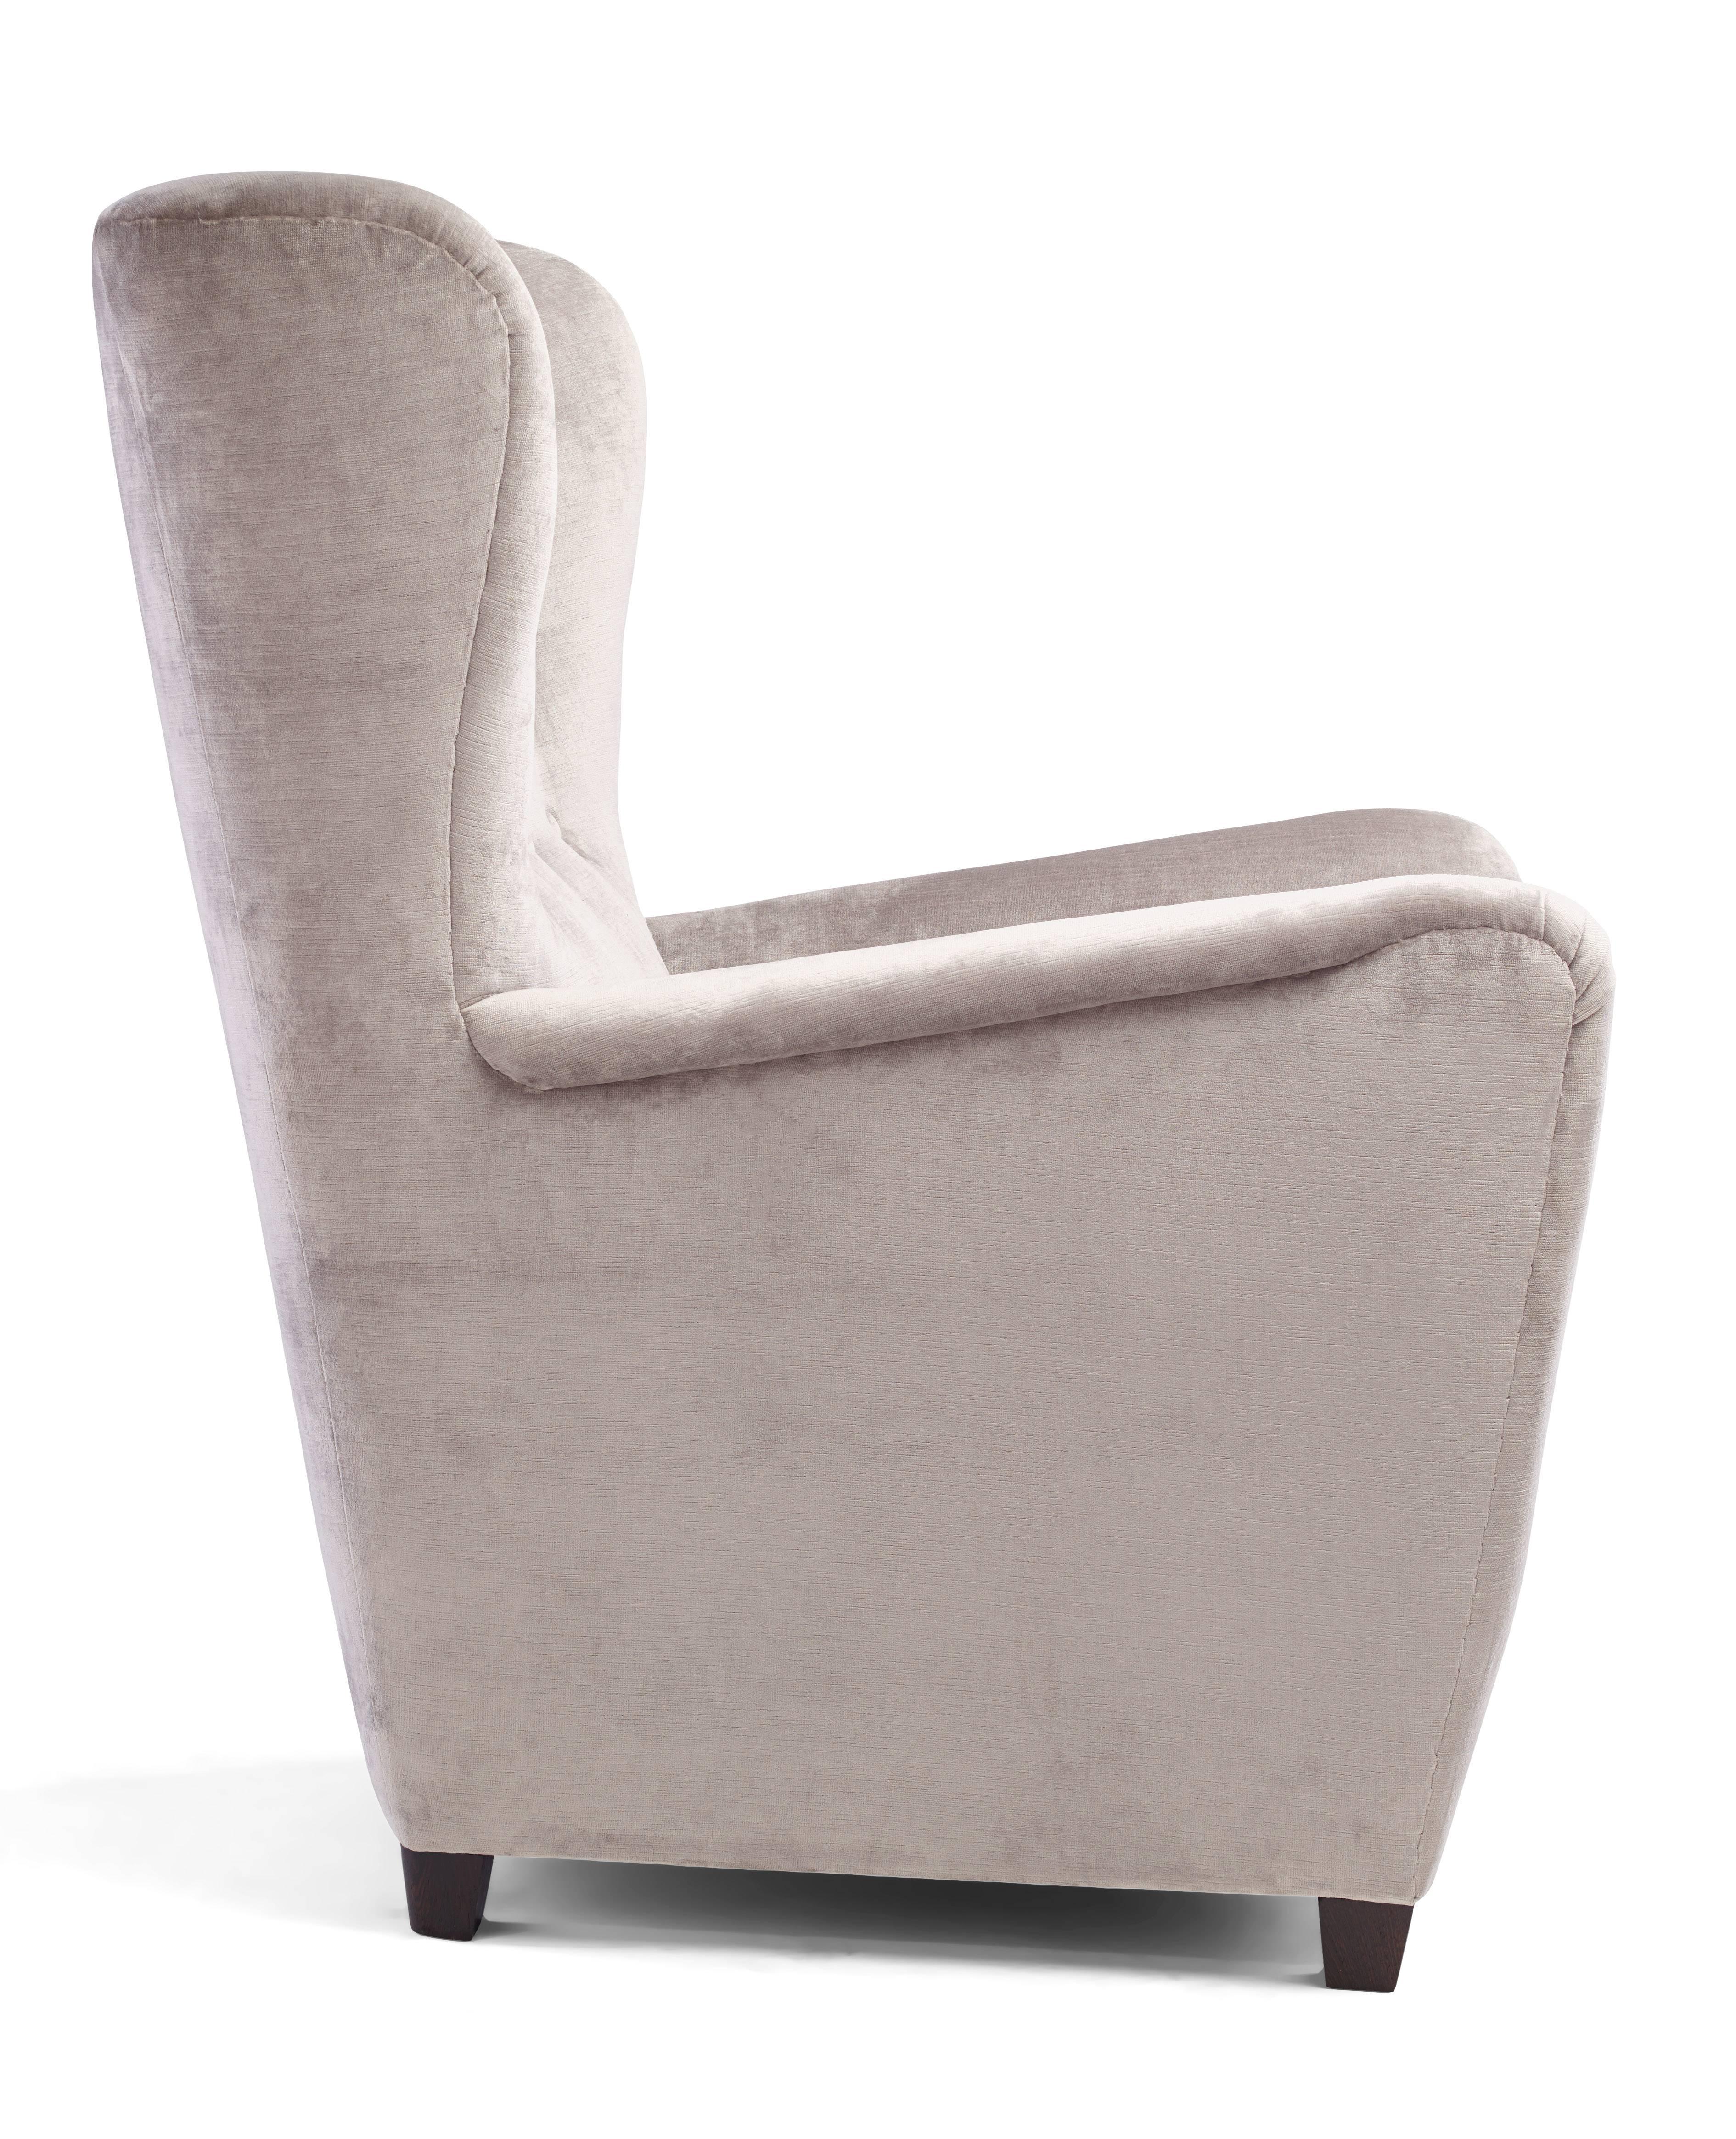 The 1942 armchair represents the finest in handmade custom upholstered furniture. Based heavily on a 1942 Danish design, a number of details have been reworked and updated to make the chair both more stylish, and more comfortable for today's